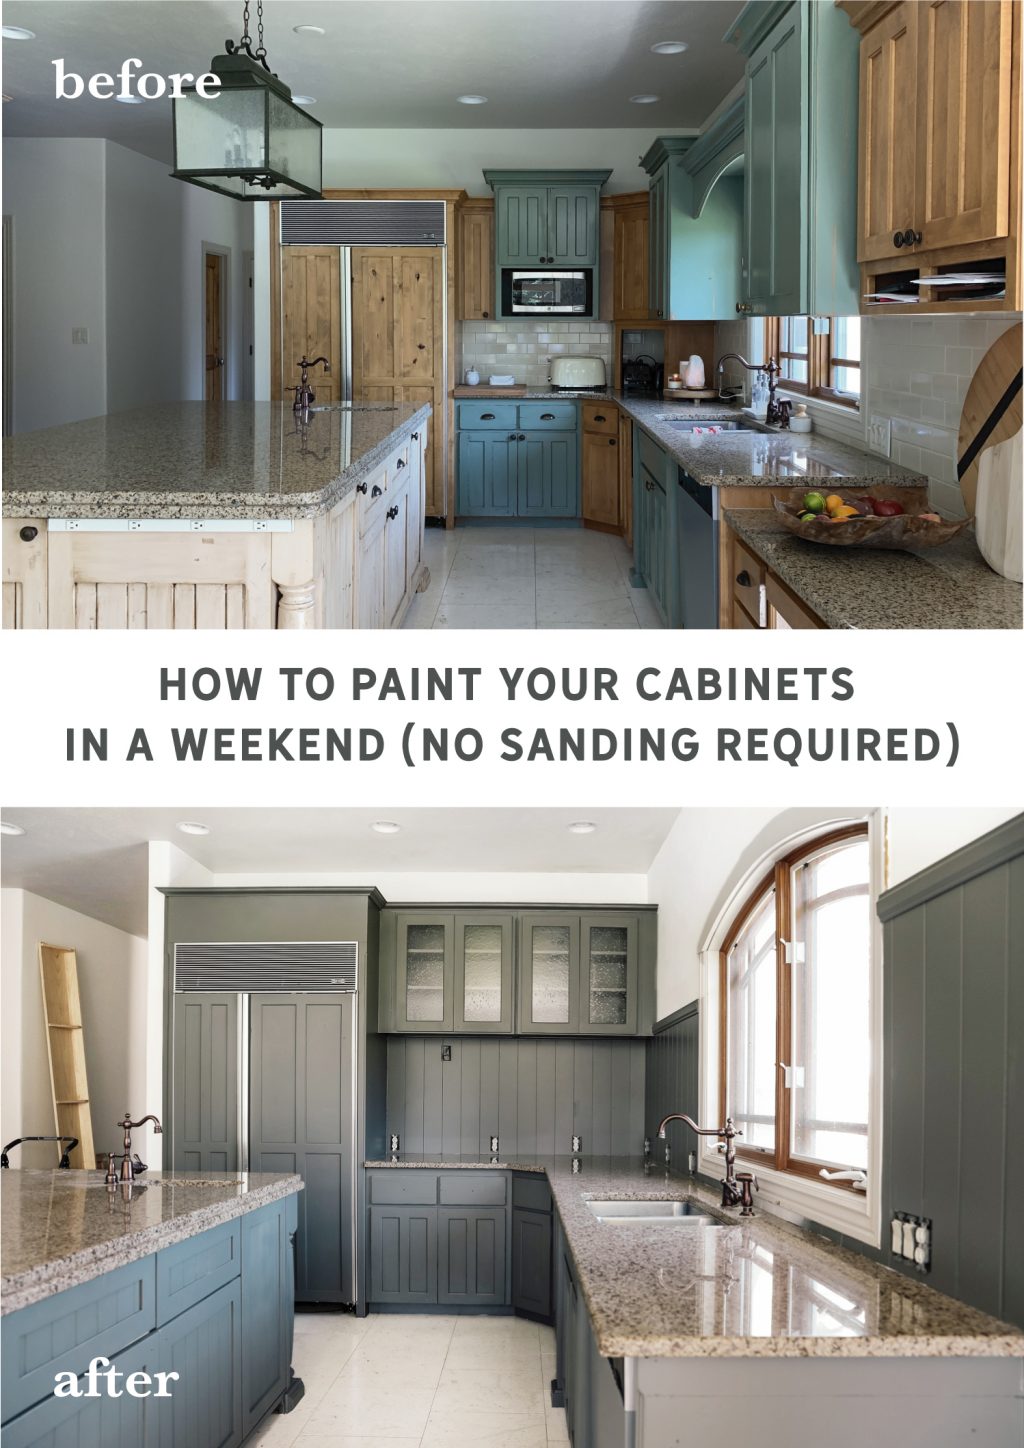 How To Paint Your Cabinets In A Weekend, Spray Painting Your Kitchen Cabinets